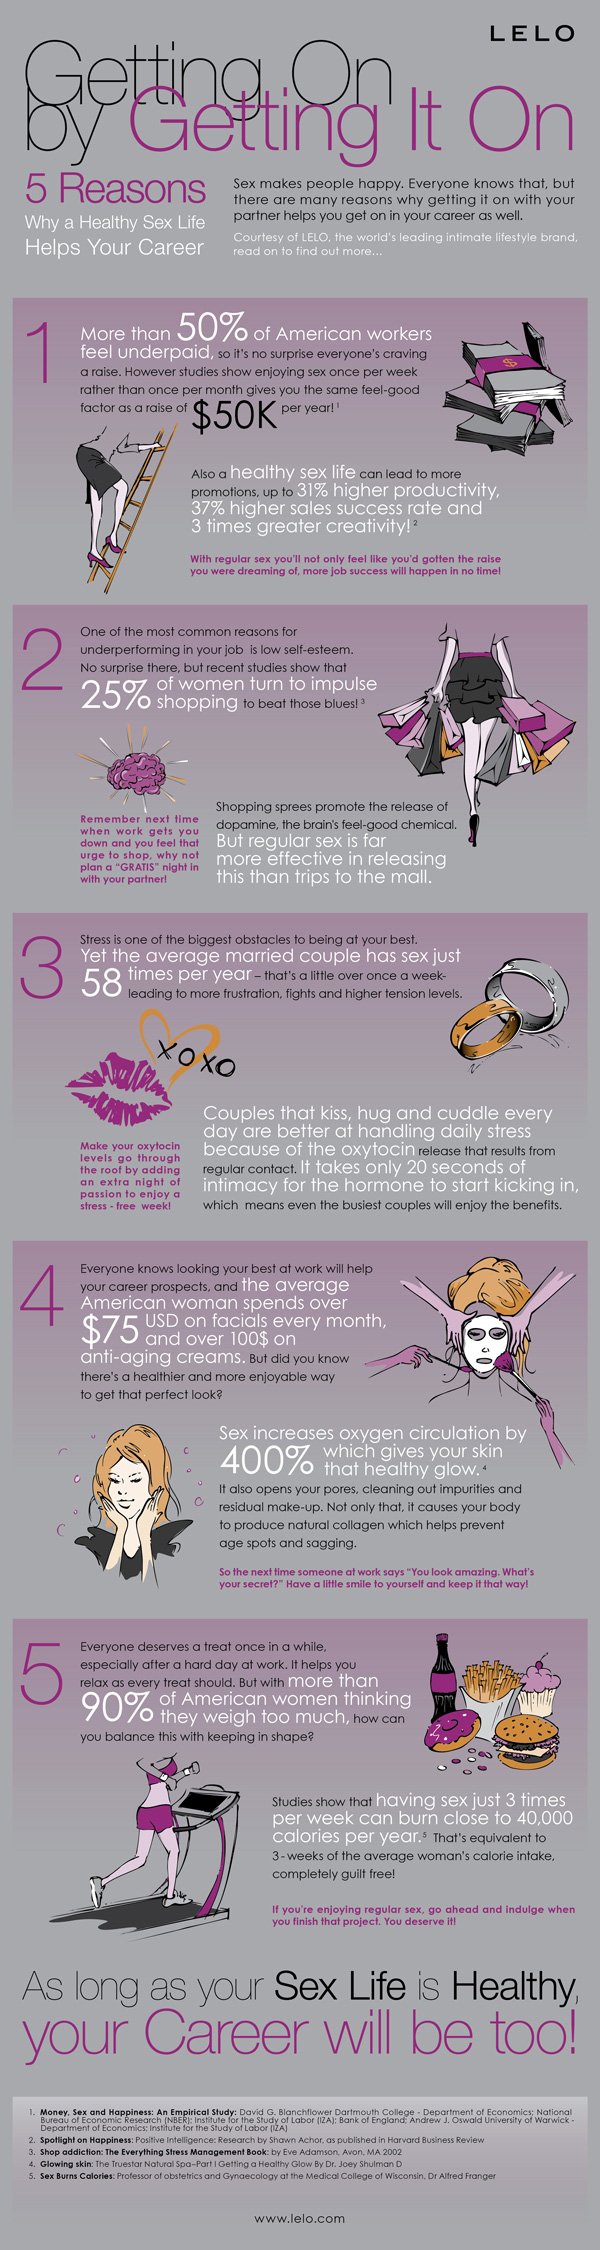 LELO Infographic - Getting On by Getting It On